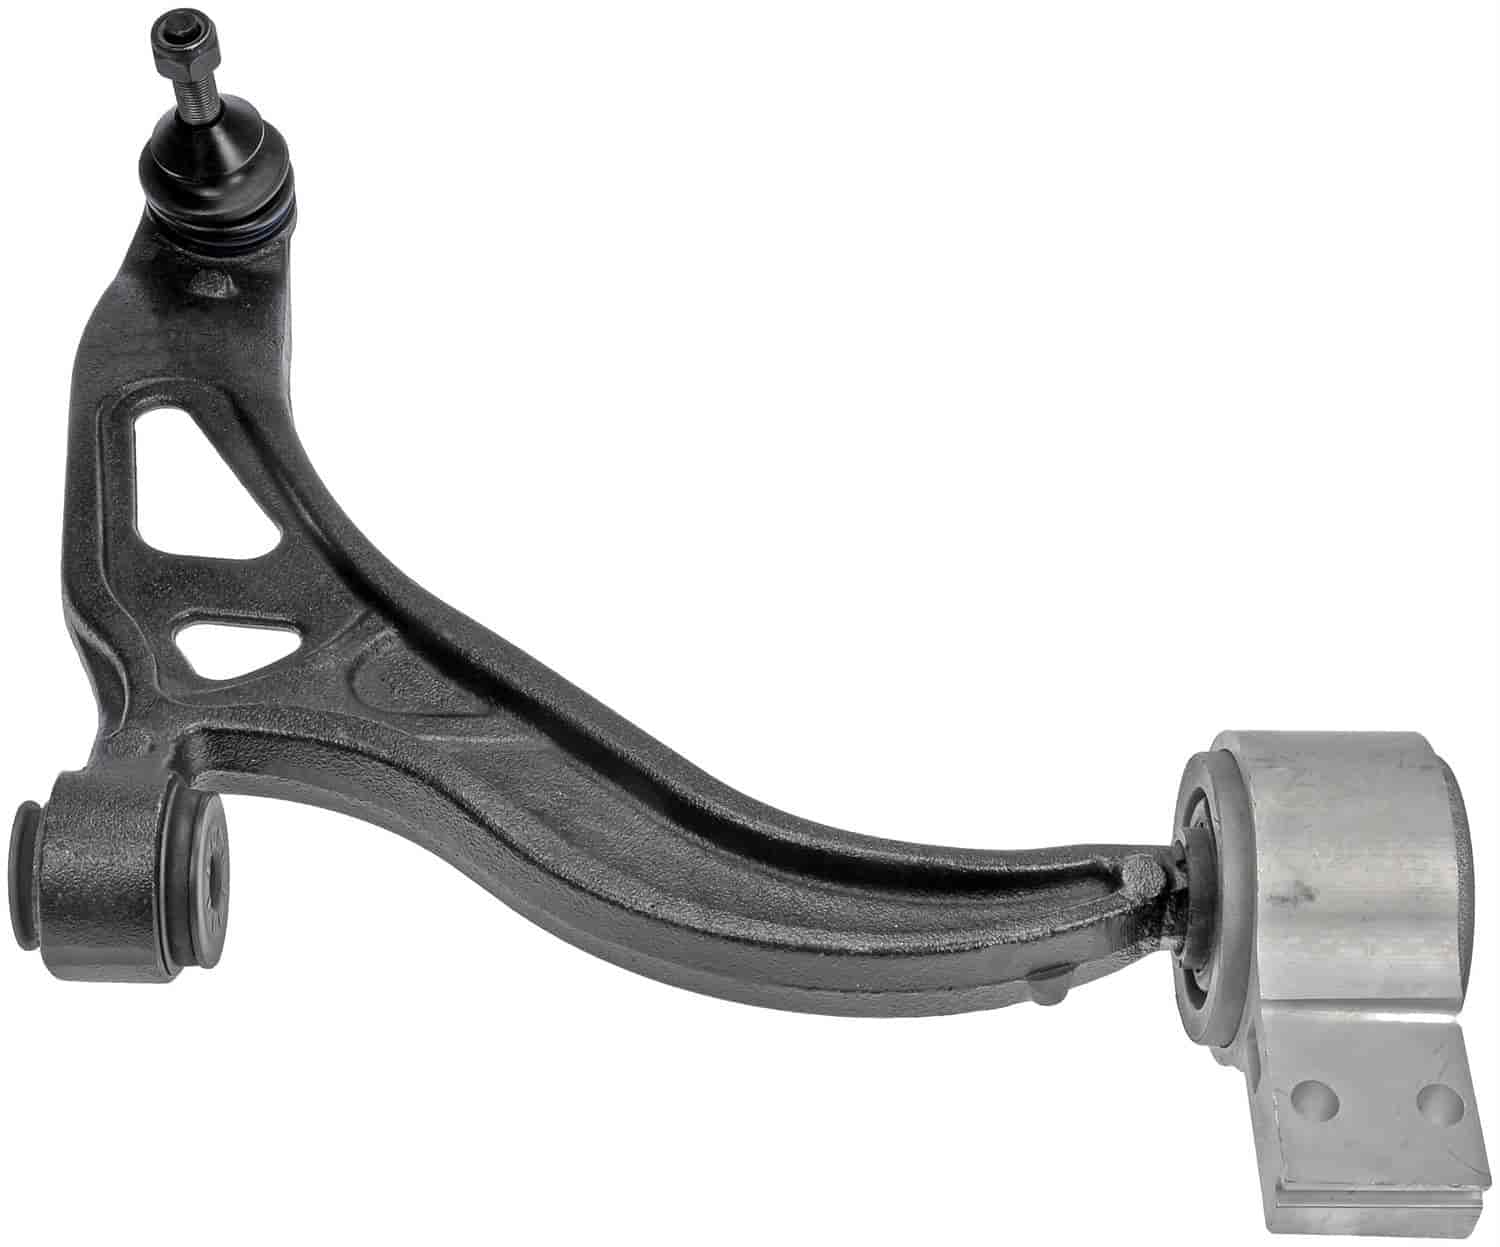 Lower Control Arm 2011-2017 Ford Explorer, 2013-2015 Ford Police Interceptor Utility - Front Right